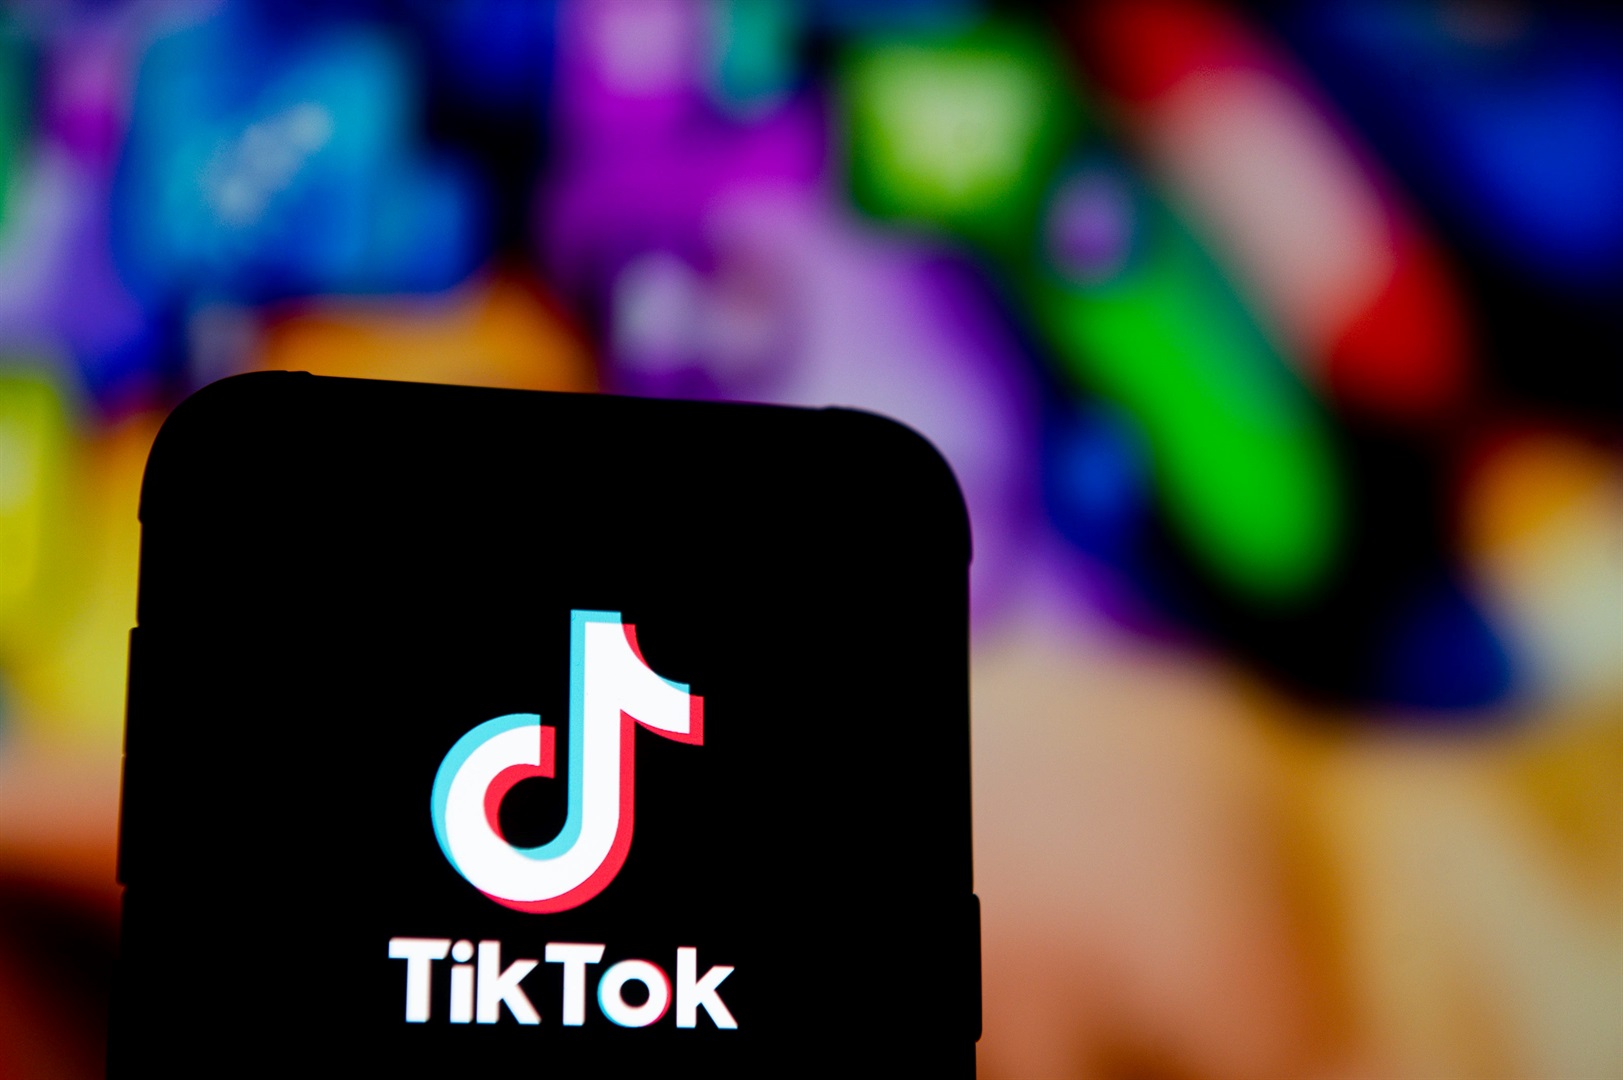 TikTok is being sued after two young US girls died while copying the 'blackout challenge', report says | Businessinsider